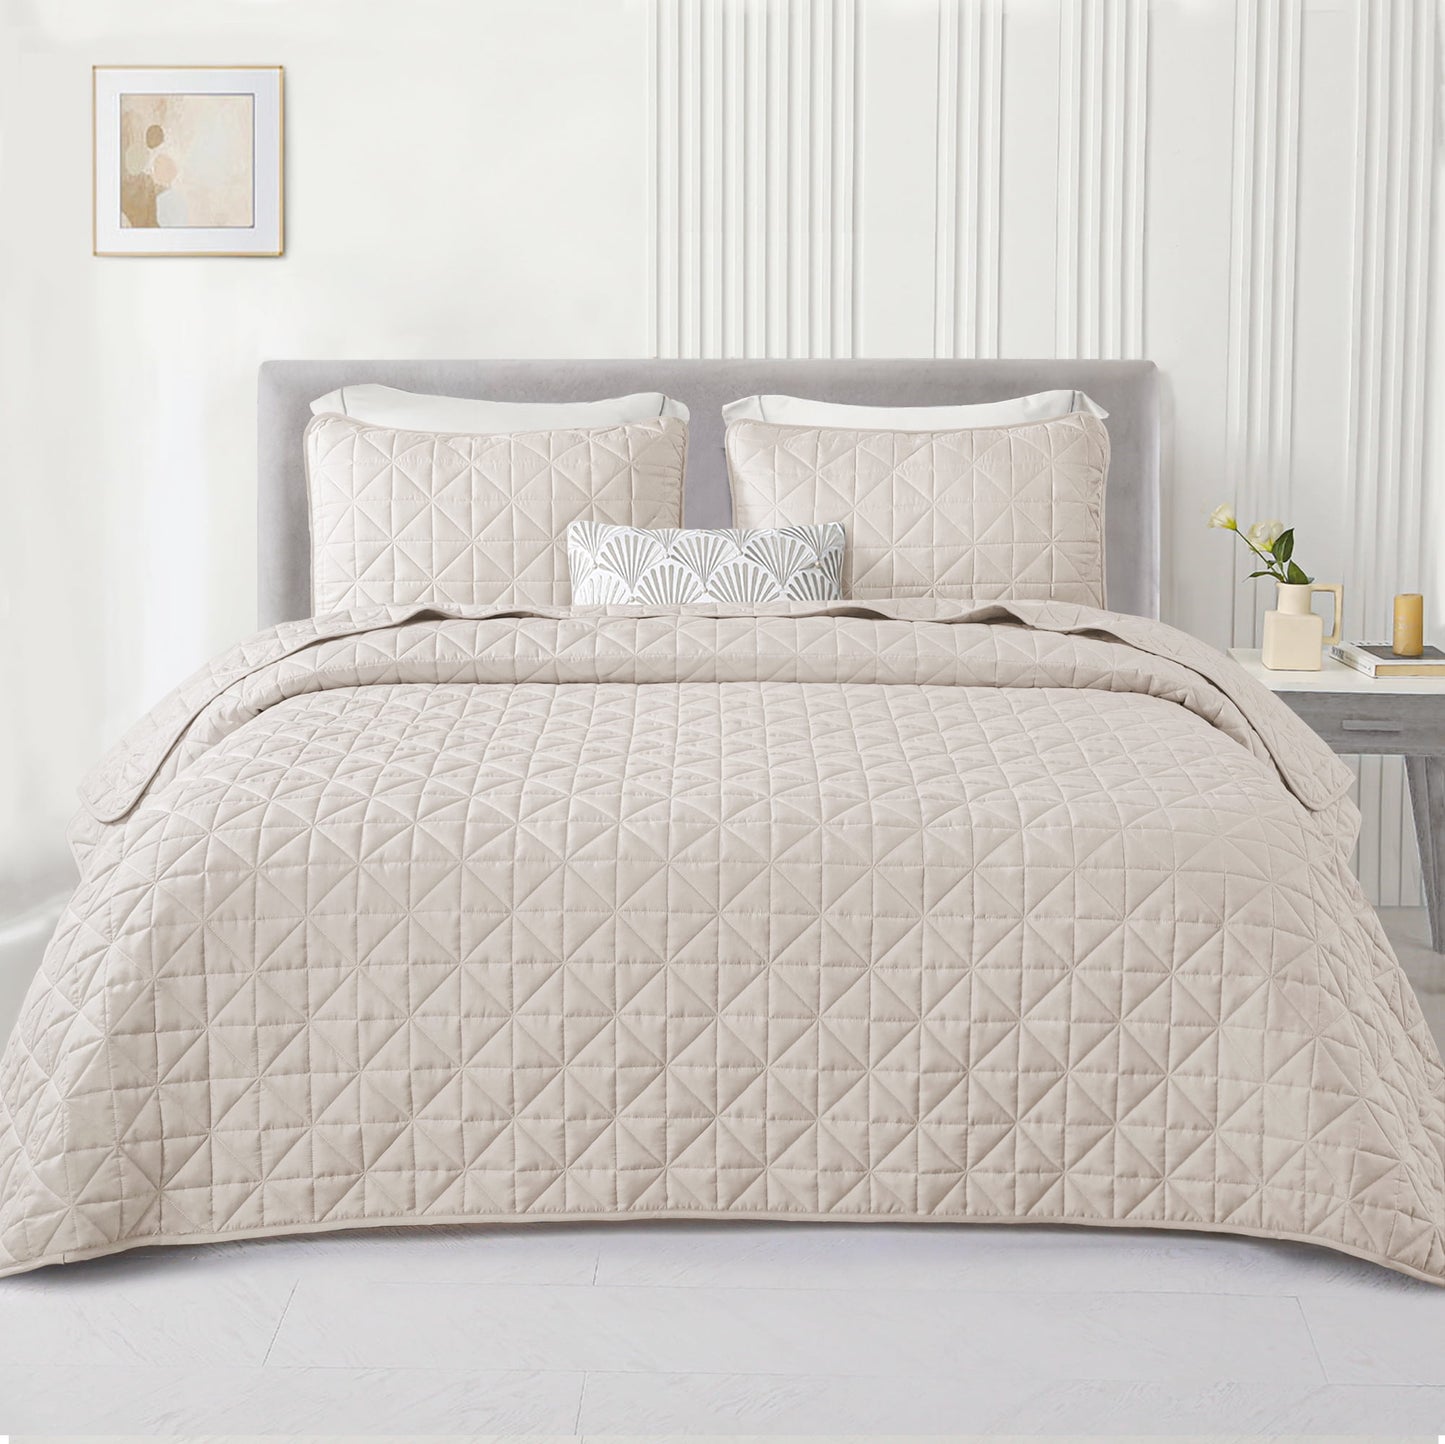 Exclusivo Mezcla Queen Quilt Bedding Set for All Seasons, Lightweight Soft Brich Beige Quilts Queen Size Bedspreads Coverlets Bed Cover with Geometric Stitched Pattern, (1 Quilt, 2 Pillow Shams)